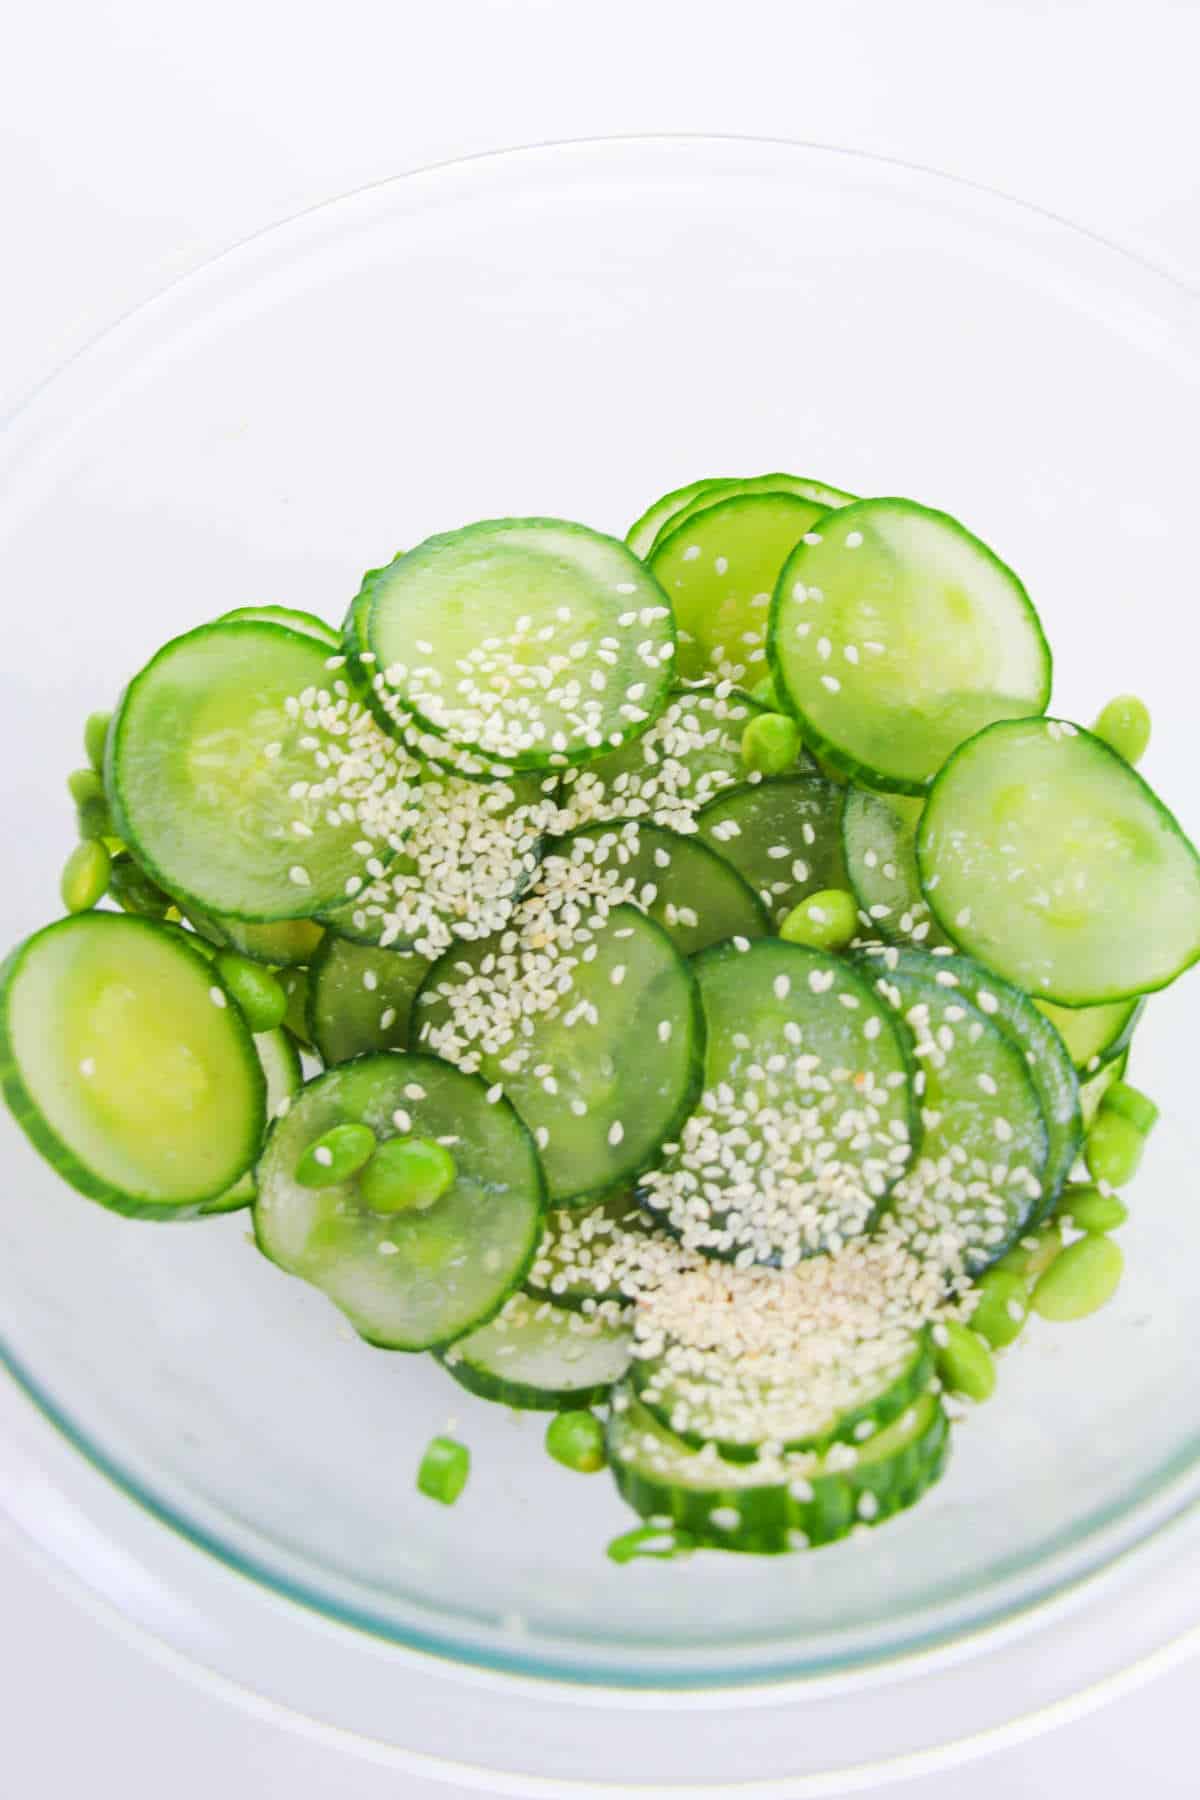 sesame seeds added to bowl of sliced cucumber and edamame beans.